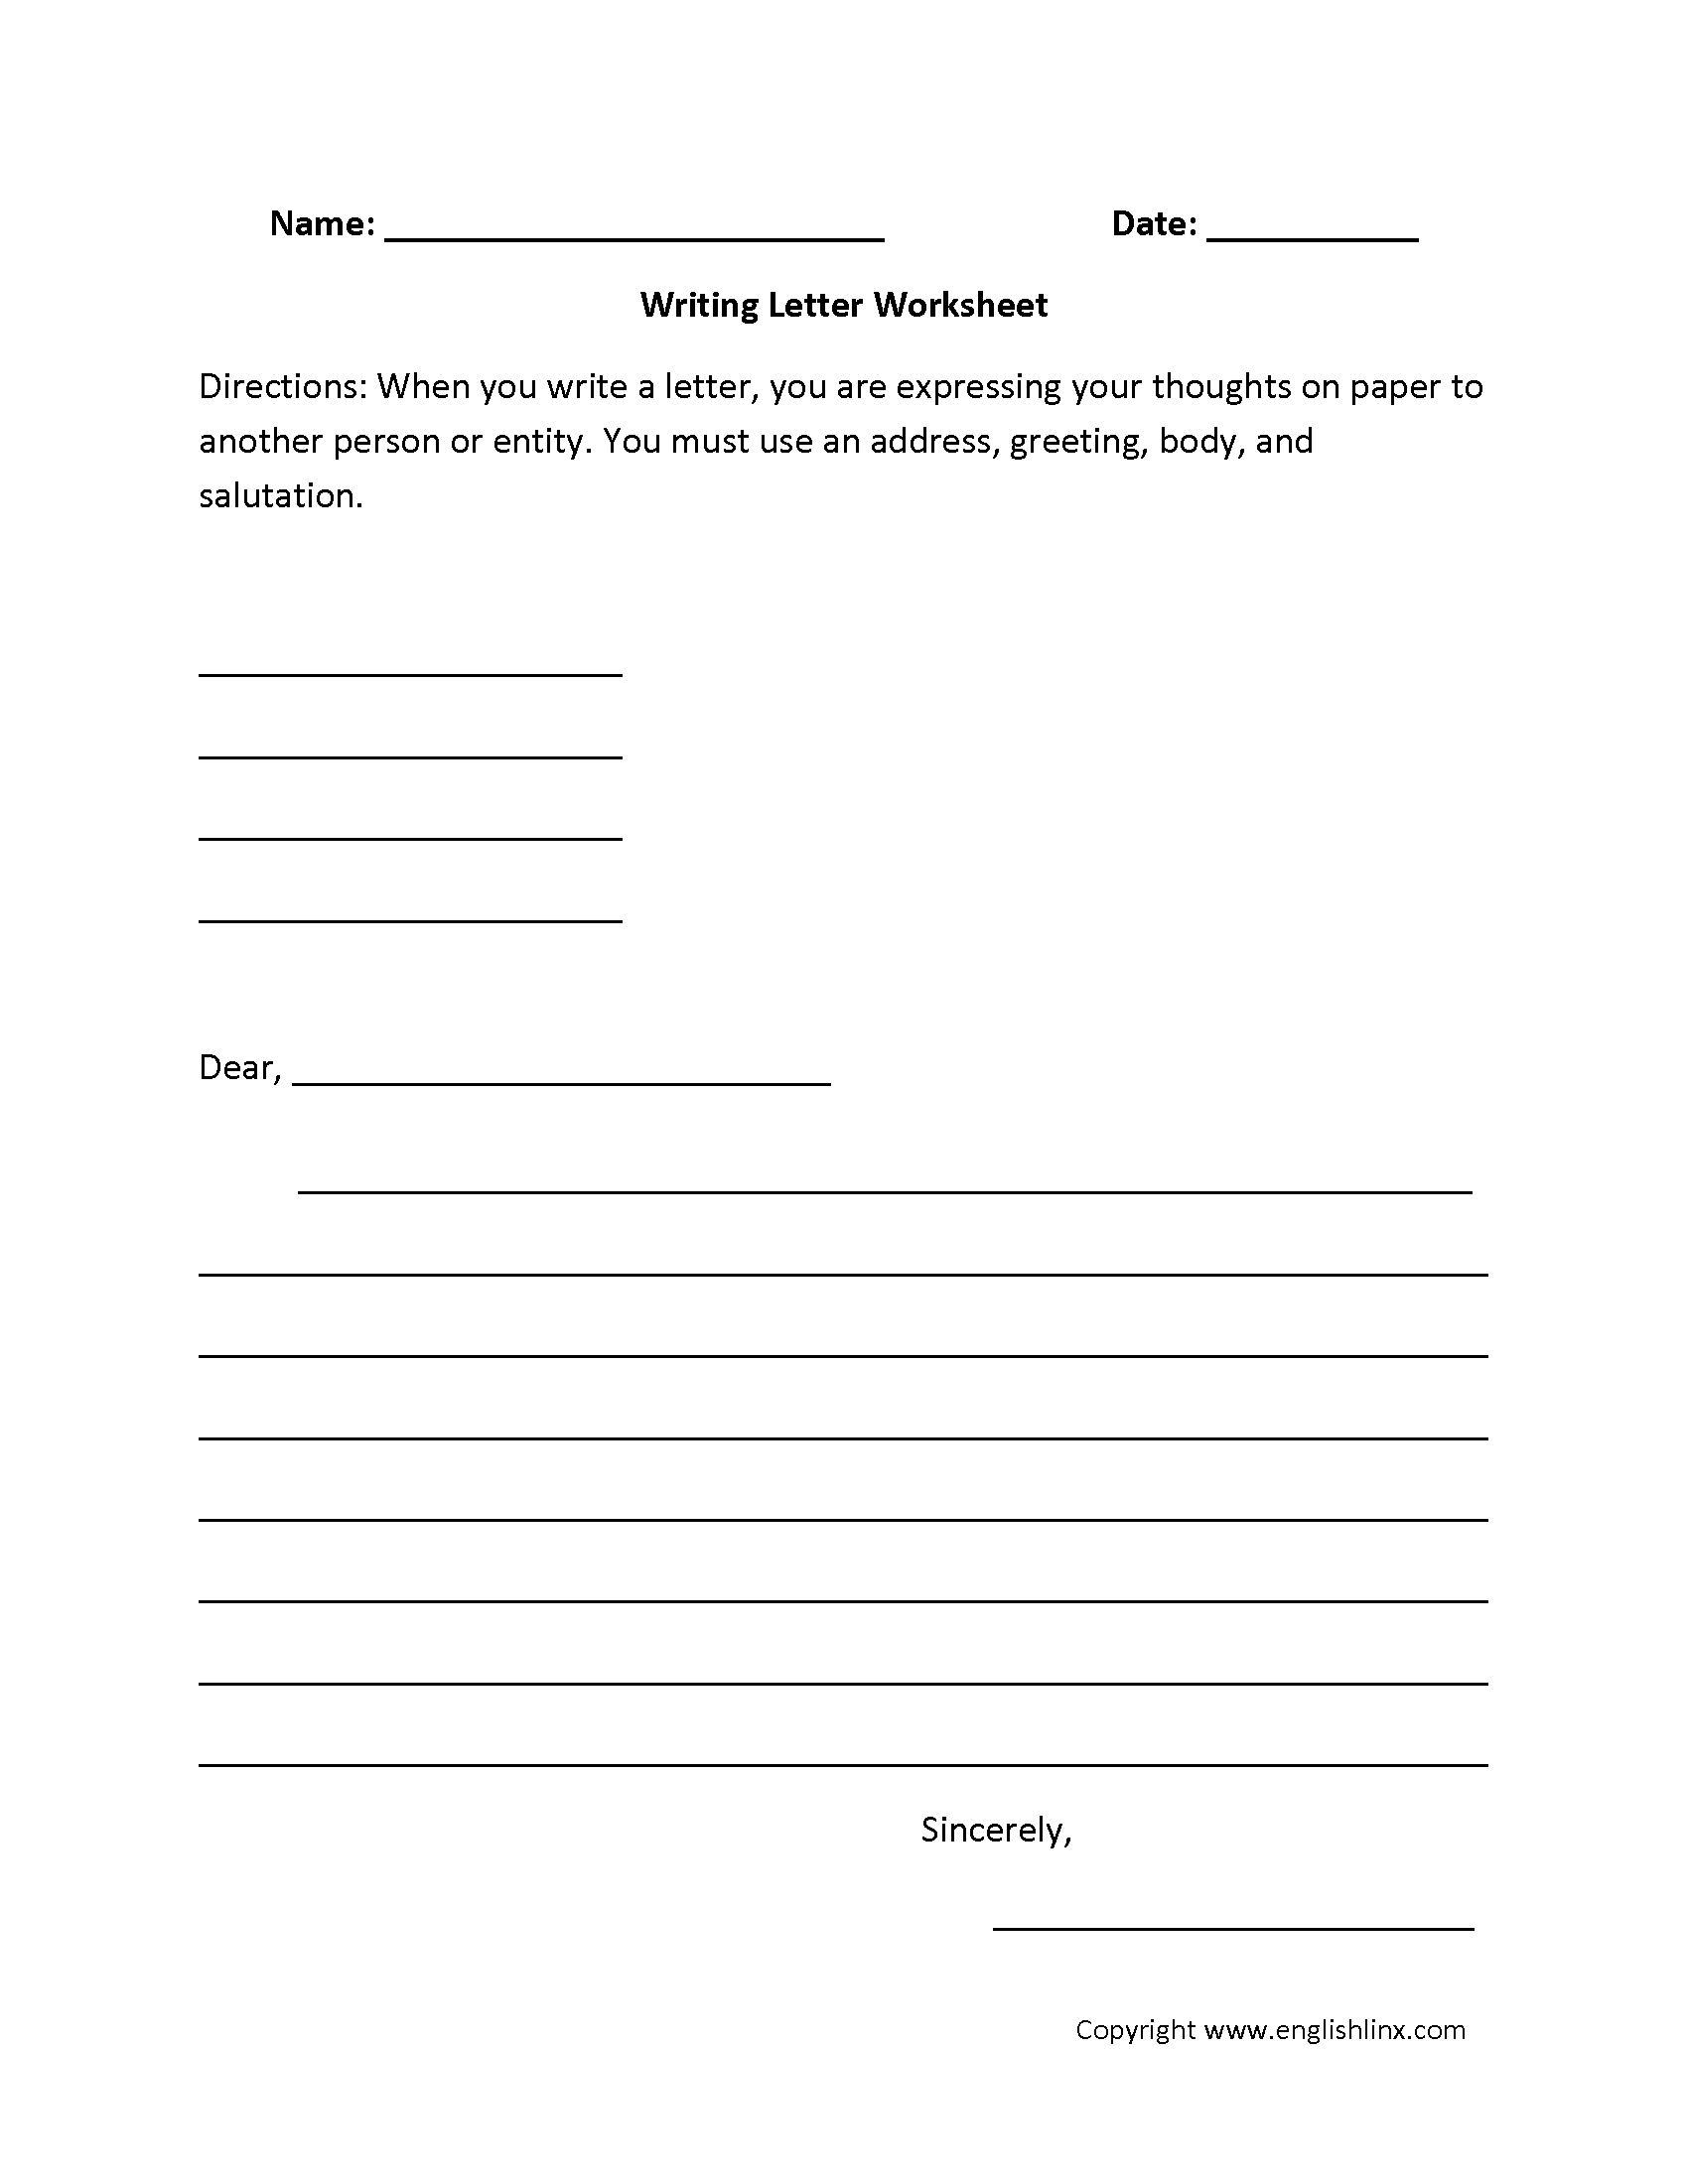 Writing Worksheets  Letter Writing Worksheets Pertaining To Letter Writing Worksheets For Grade 3